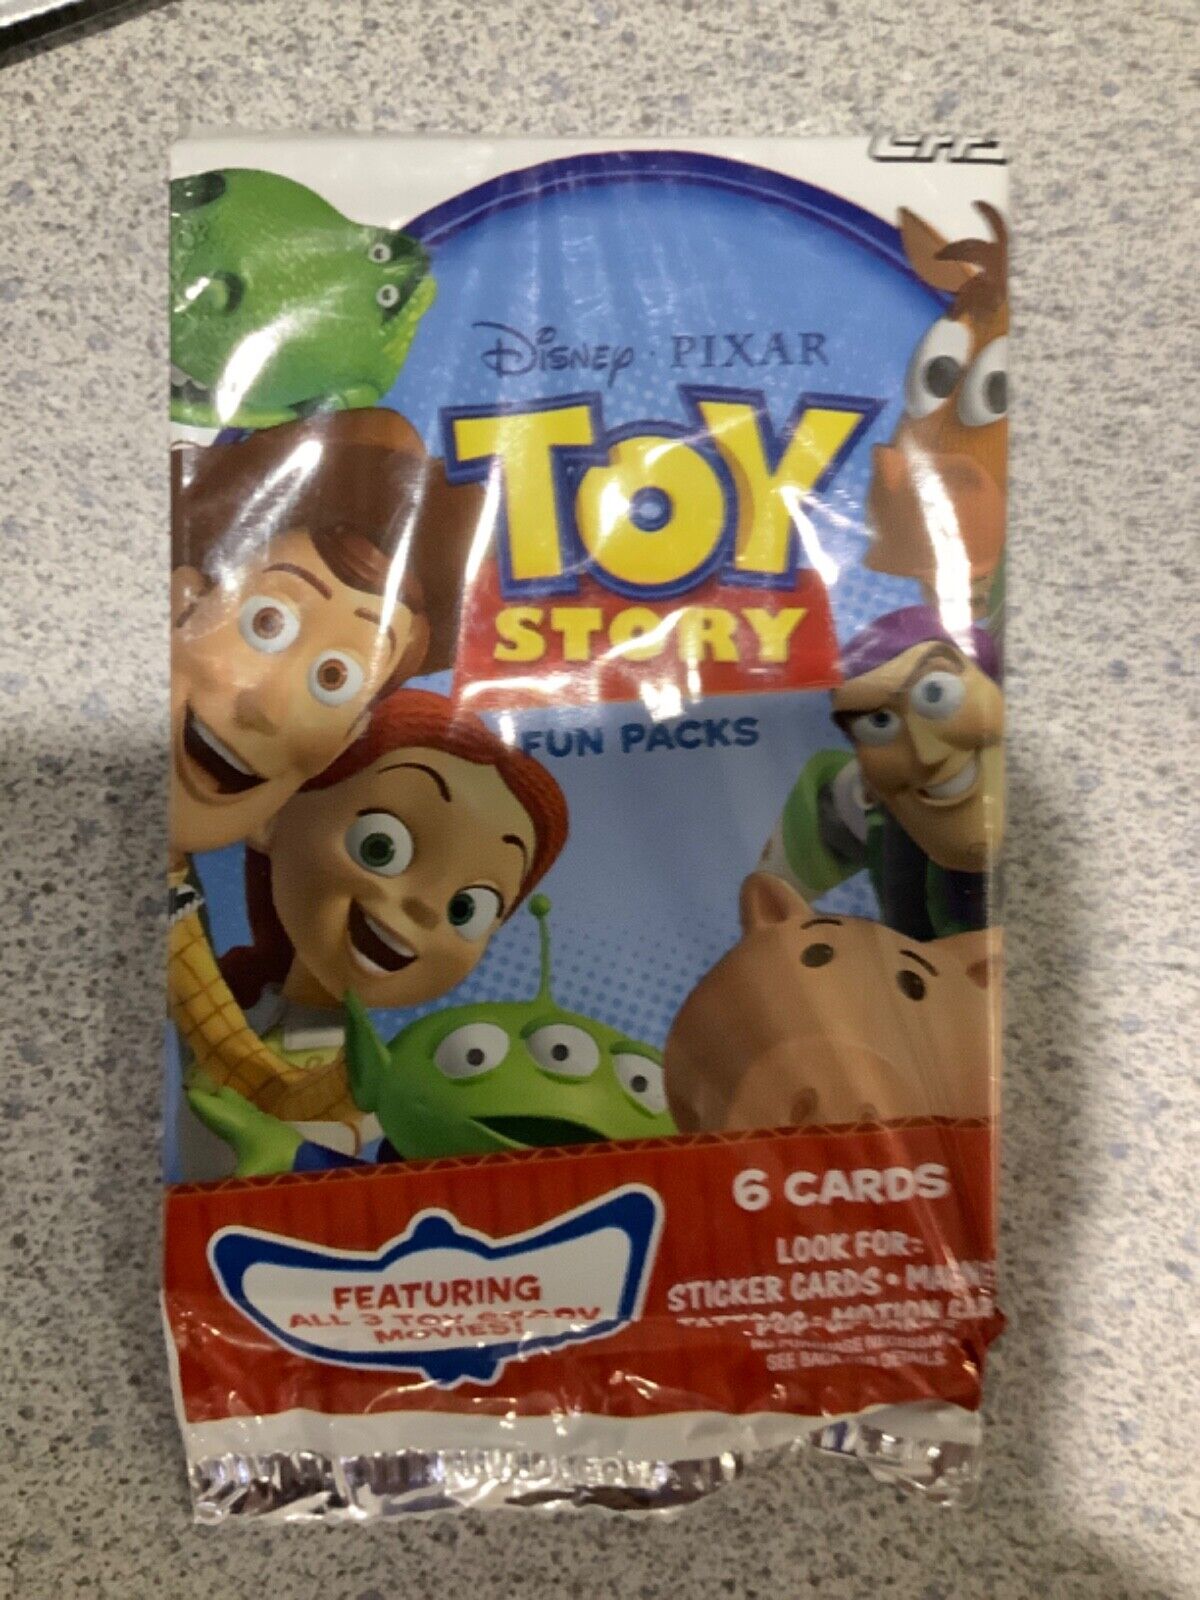 Topps Toy Story Trading Card Packs 6 Per pack Disney 2010 Pixar All 3 Movies